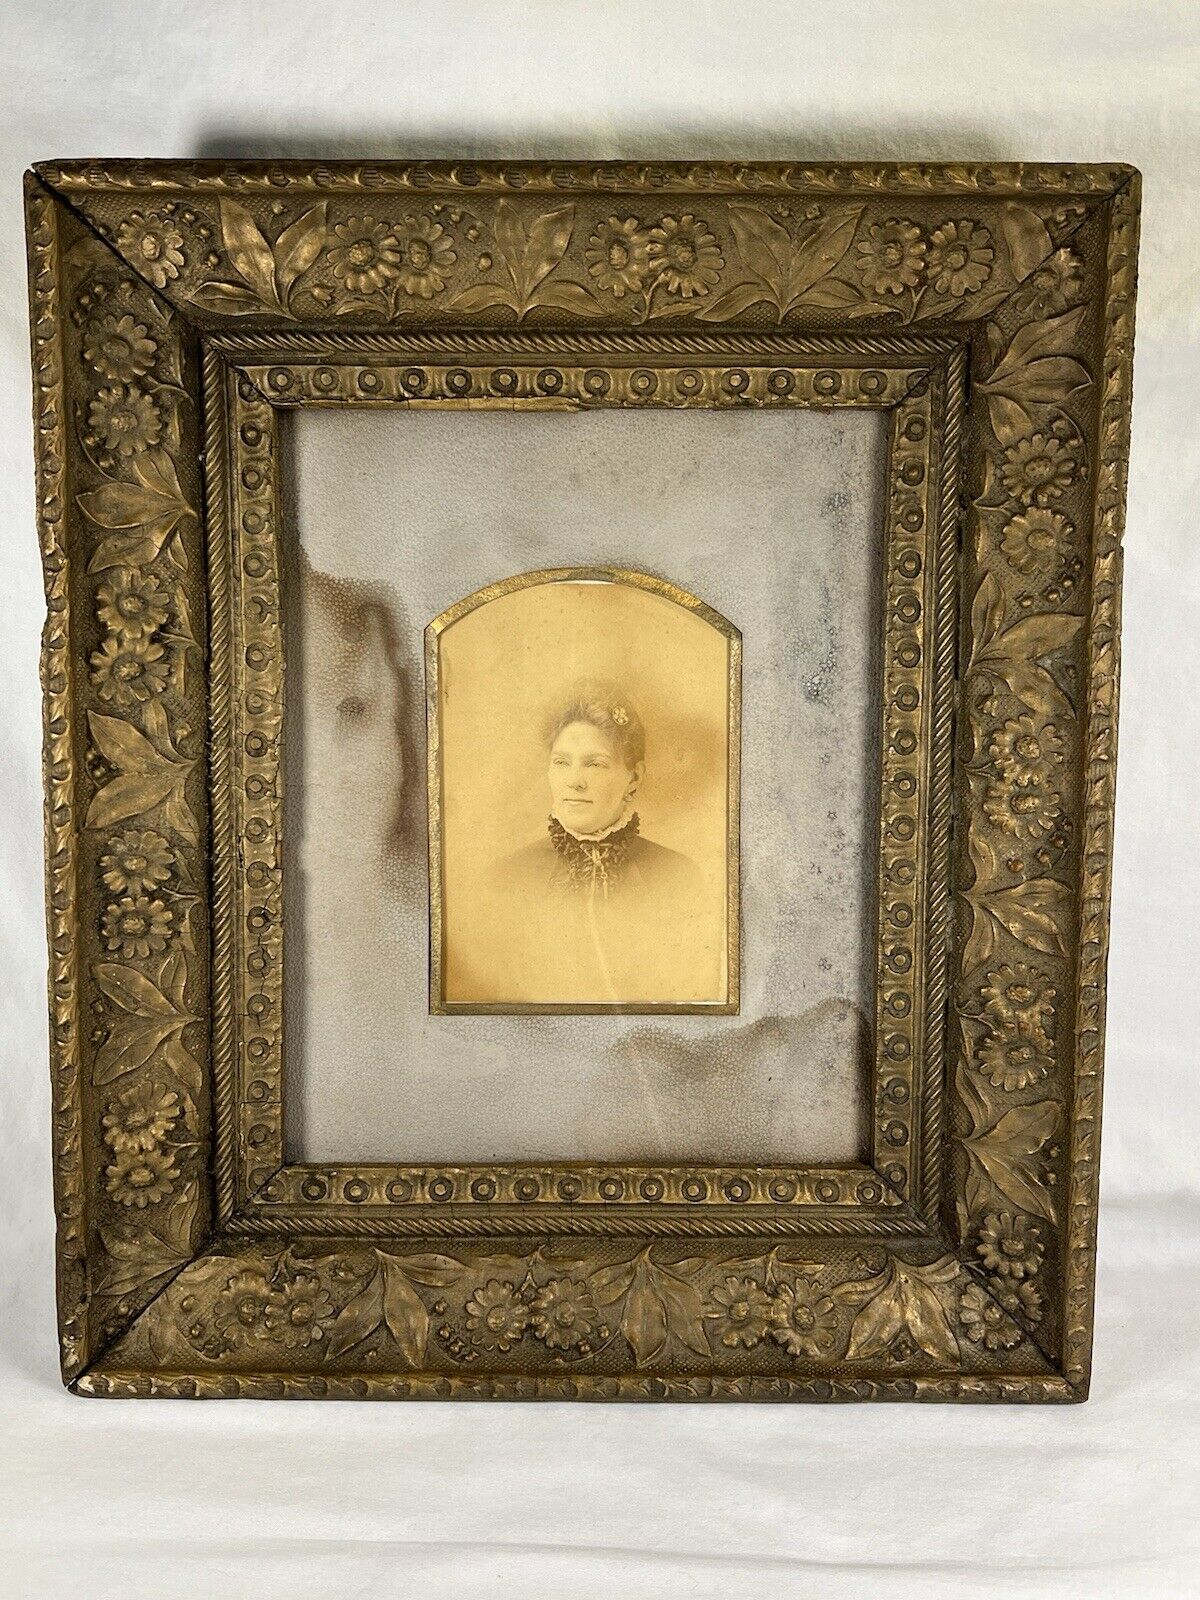 VTG Antique Ornate Gold Gilded Wood Picture 14.5x12.5” Holds 8x10” gesso